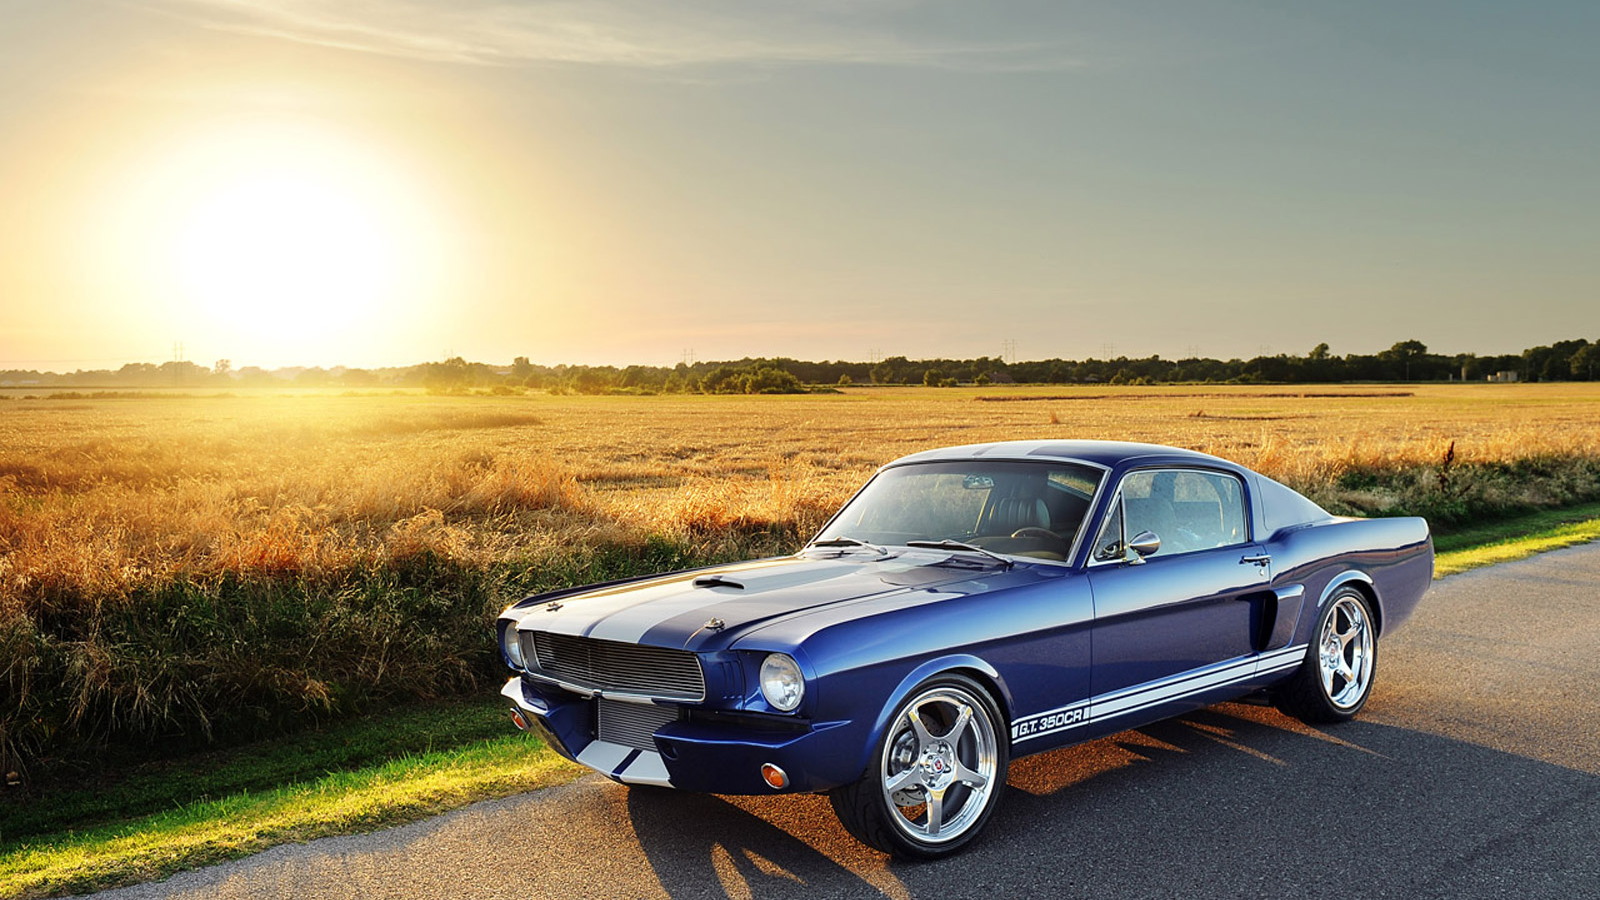 Classic Recreations’s 1966 Mustang Fastback Shelby GT350CR